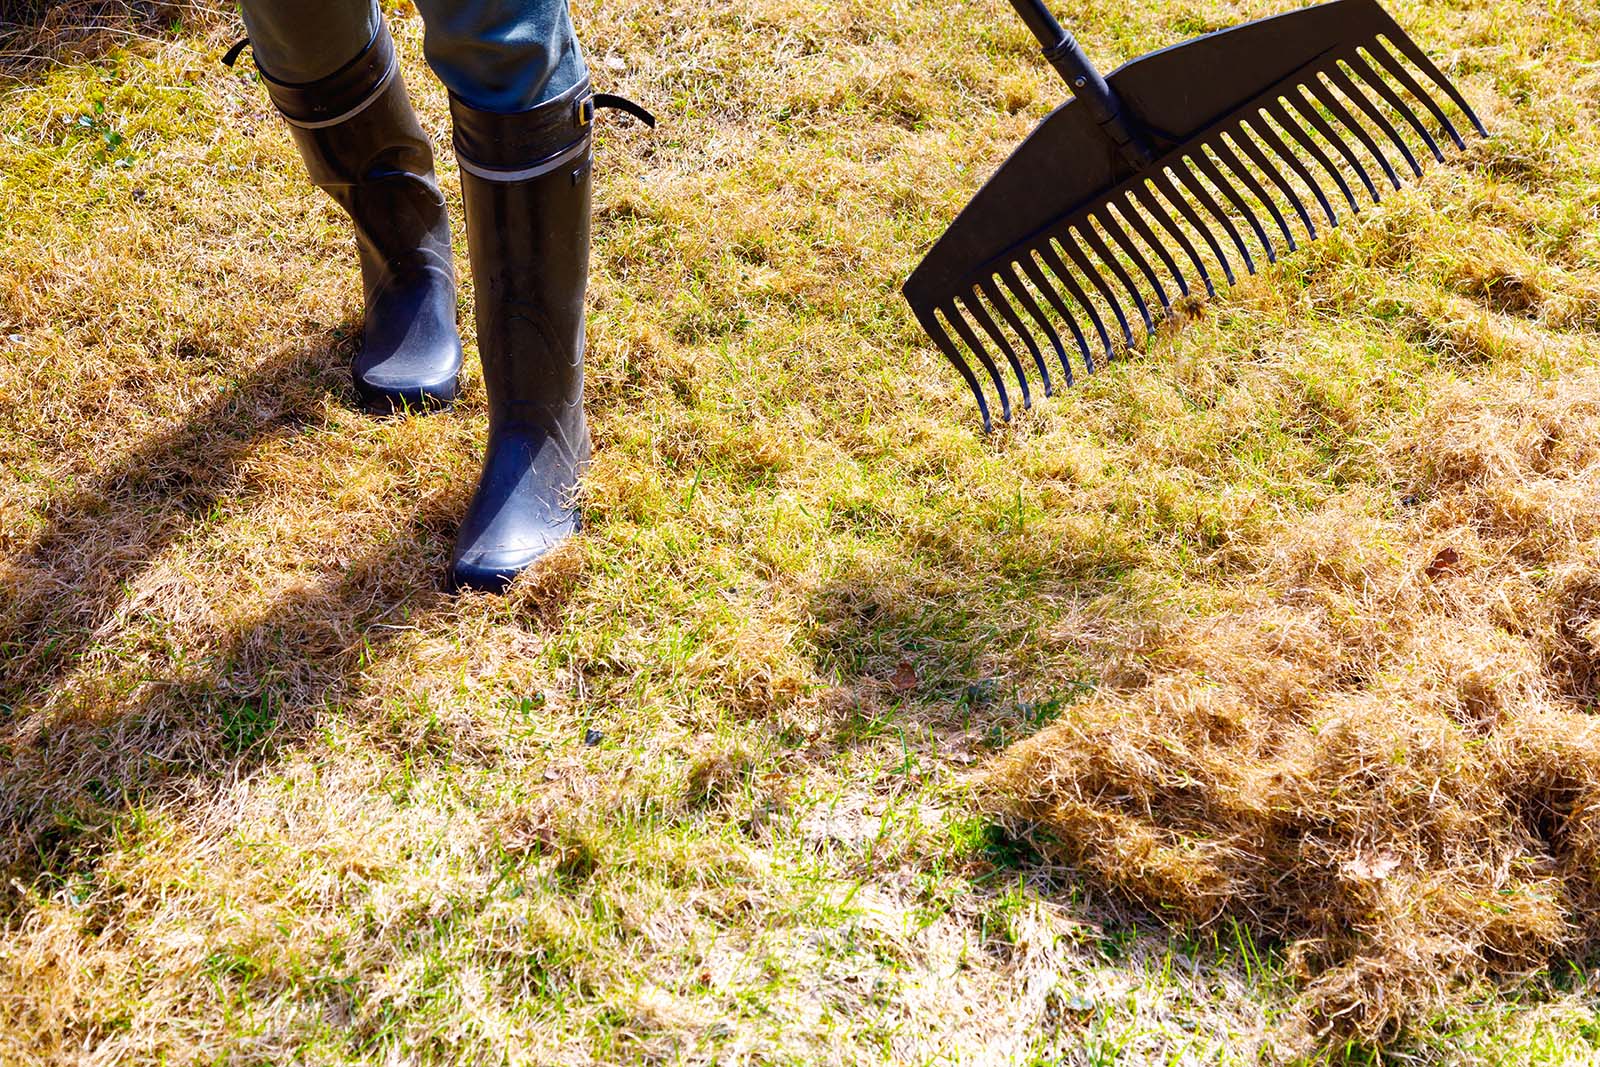 How to Maintain Your Lawn in a Drought